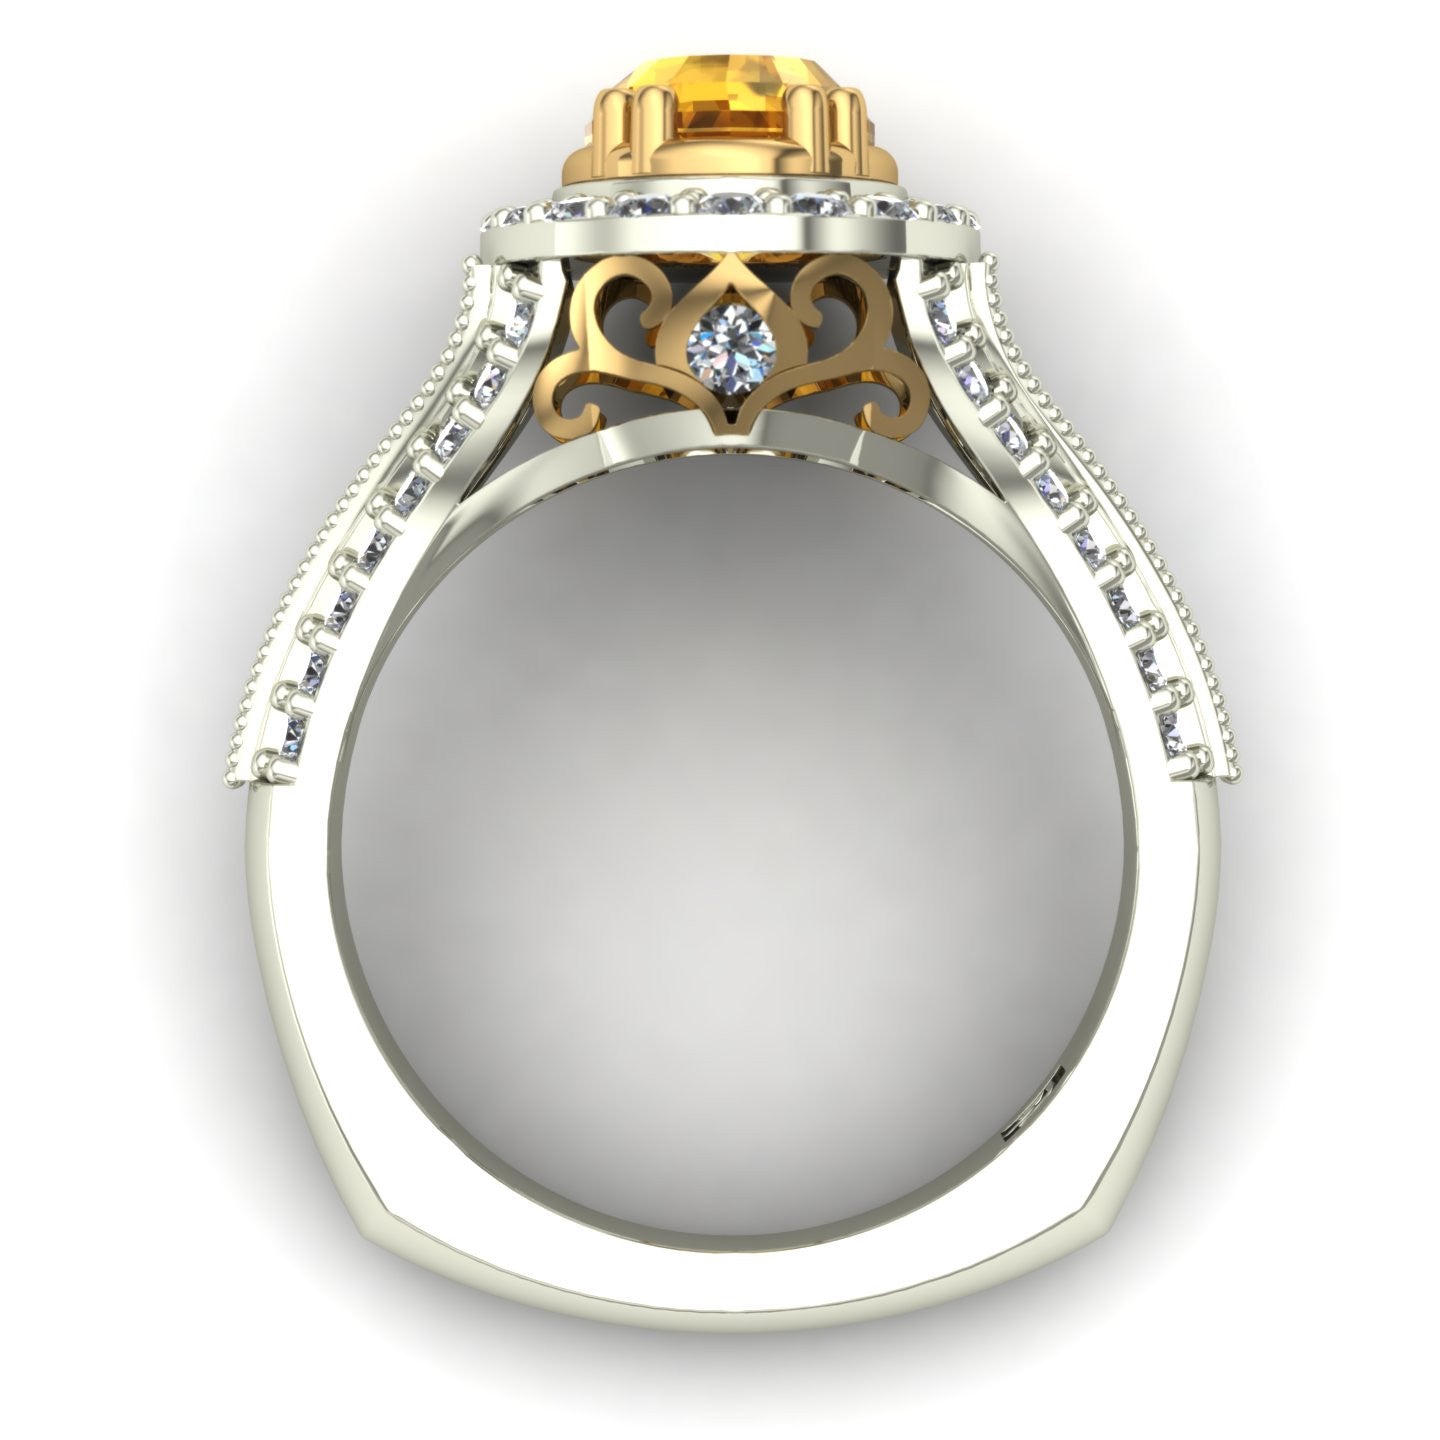 Yellow sapphire and diamond oval scroll ring in 14k yellow and white gold - Charles Babb Designs
 - 2